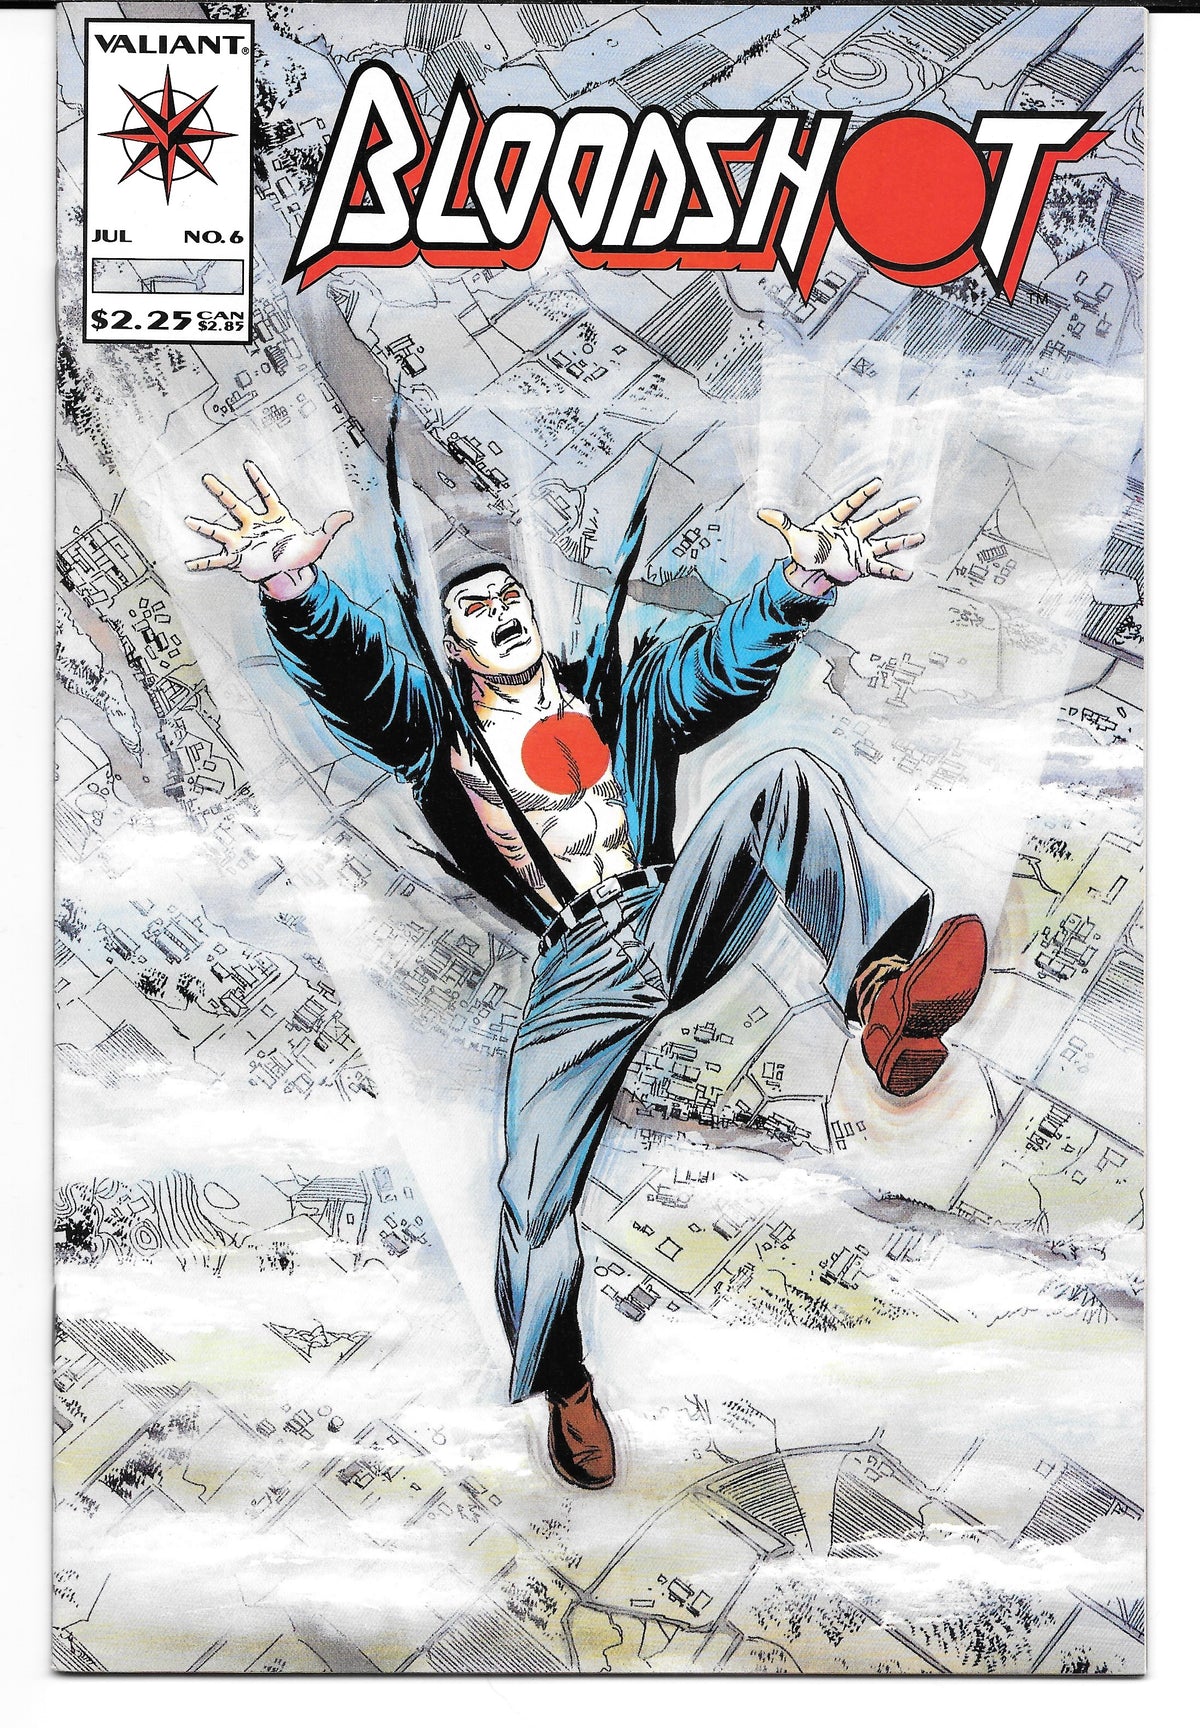 Photo of Bloodshot, Vol. 1 (1993) Issue 6A - Near Mint Comic sold by Stronghold Collectibles